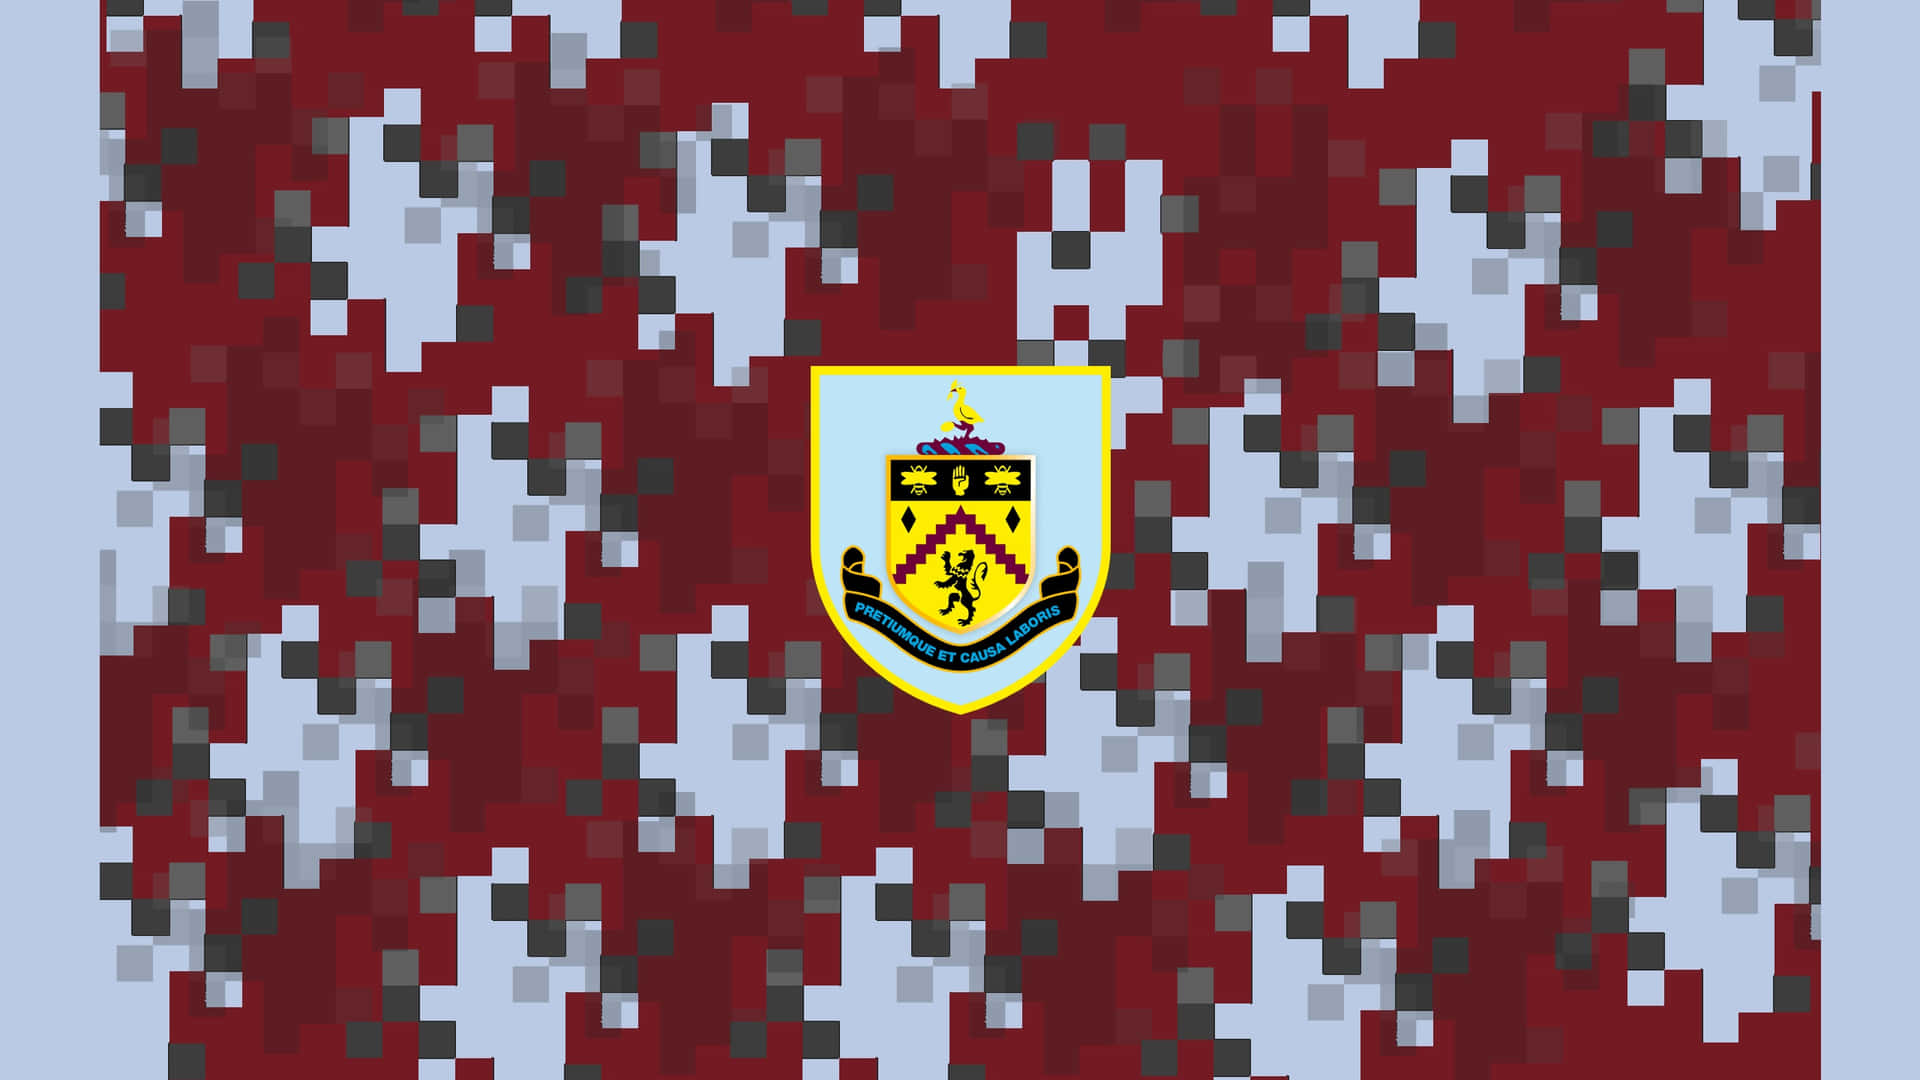 Burnley FC players celebrating on the field Wallpaper